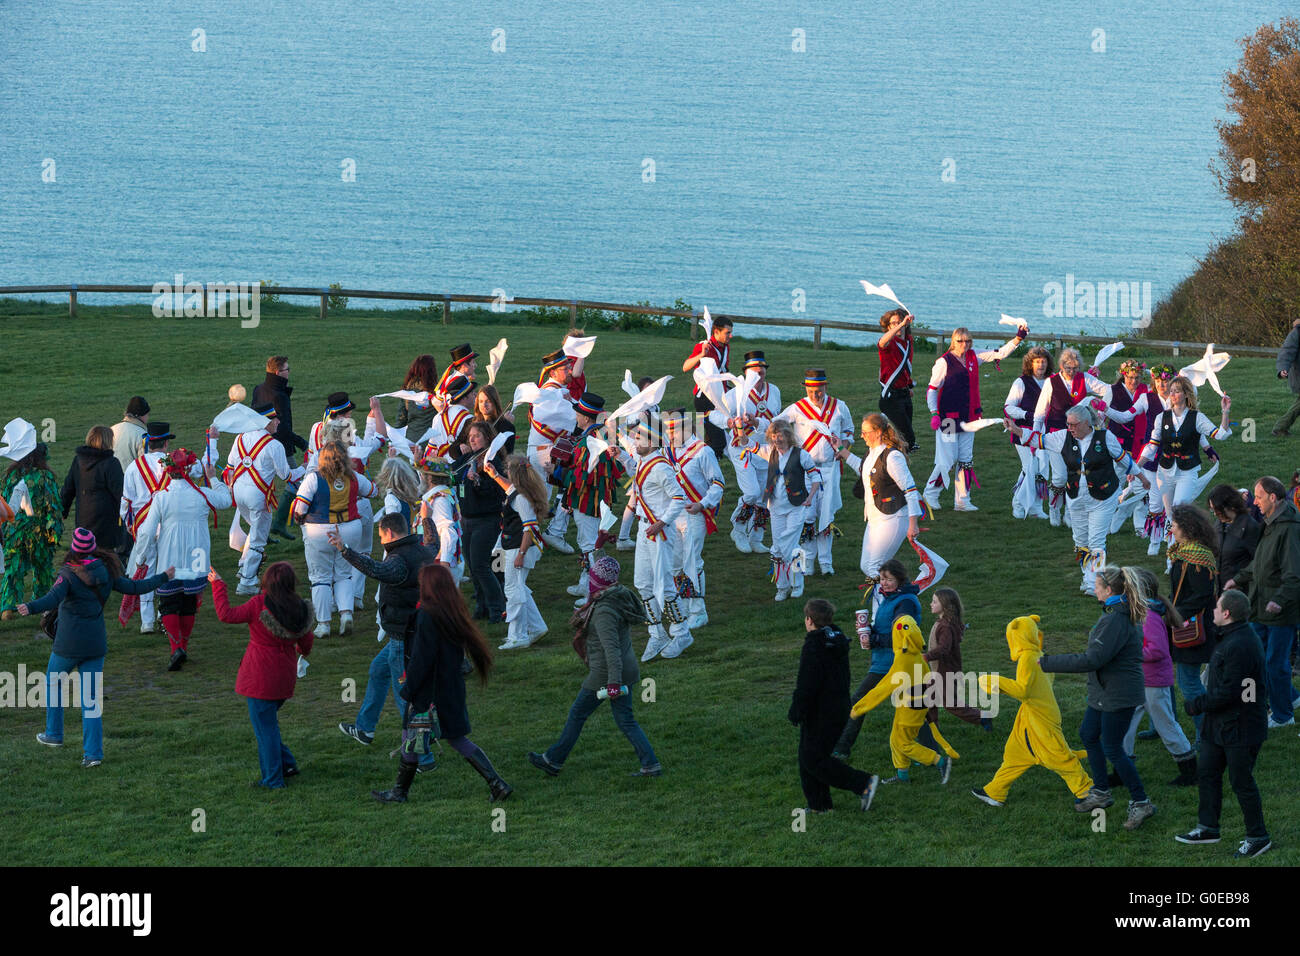 West Hill, Hastings, UK. 1 May 2016.  Morris dancers gathered at Ladies Parlour on West Hill in Hastings to dance up the sun as part of the weekend’s Jack in the Green May Day Festival. Neil Cordell/Alamy Live News Stock Photo